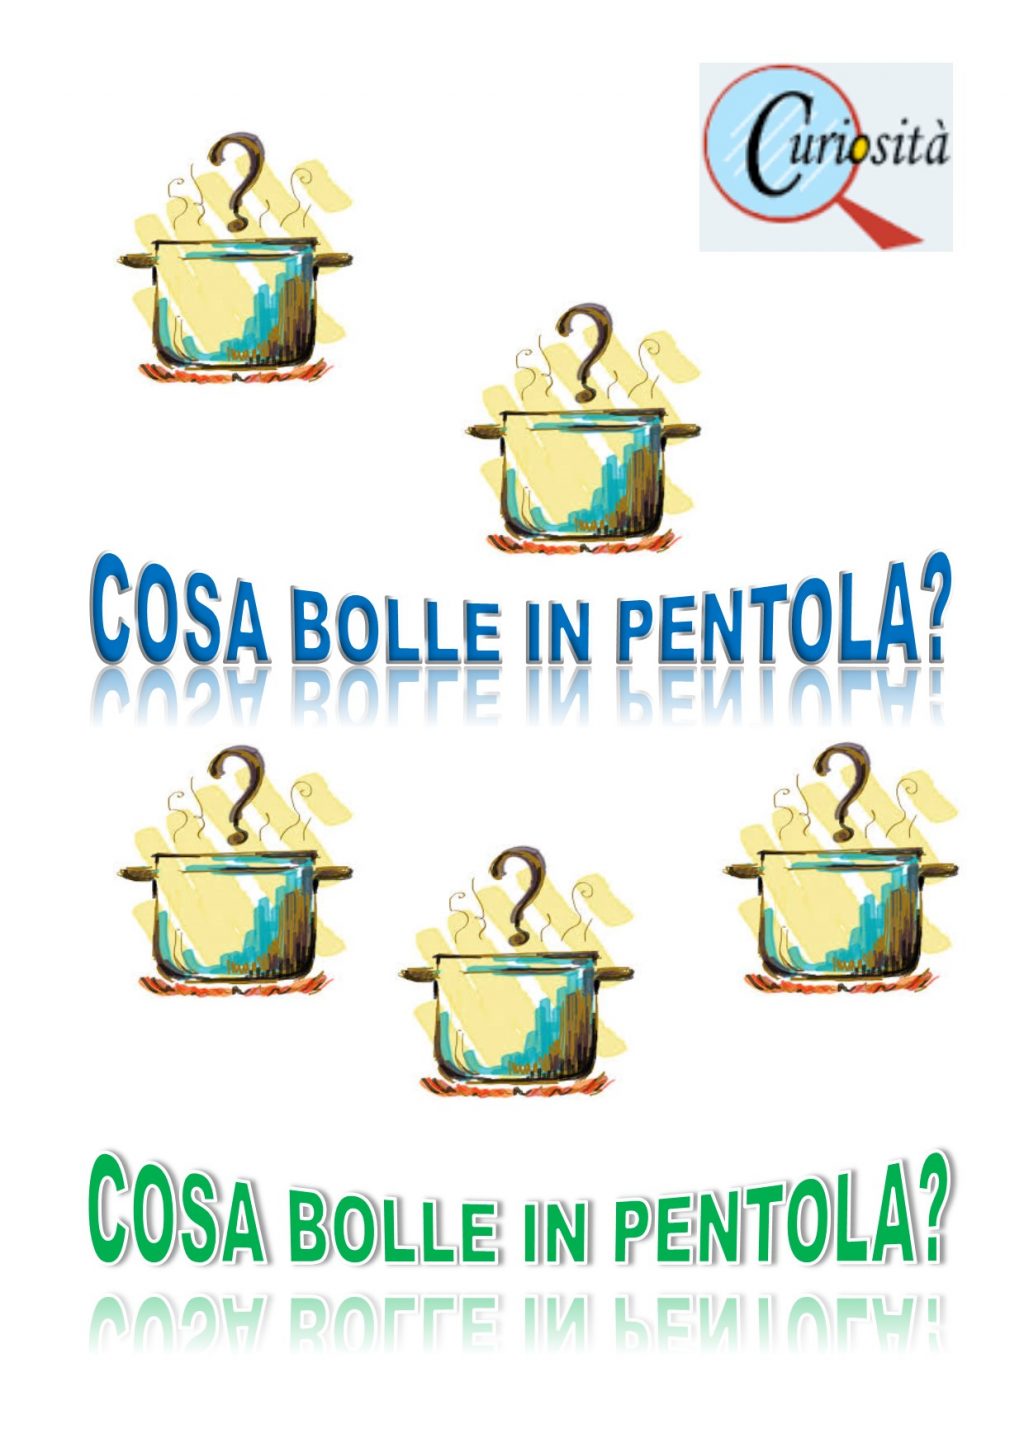 COSA BOLLE IN PENTOLA?